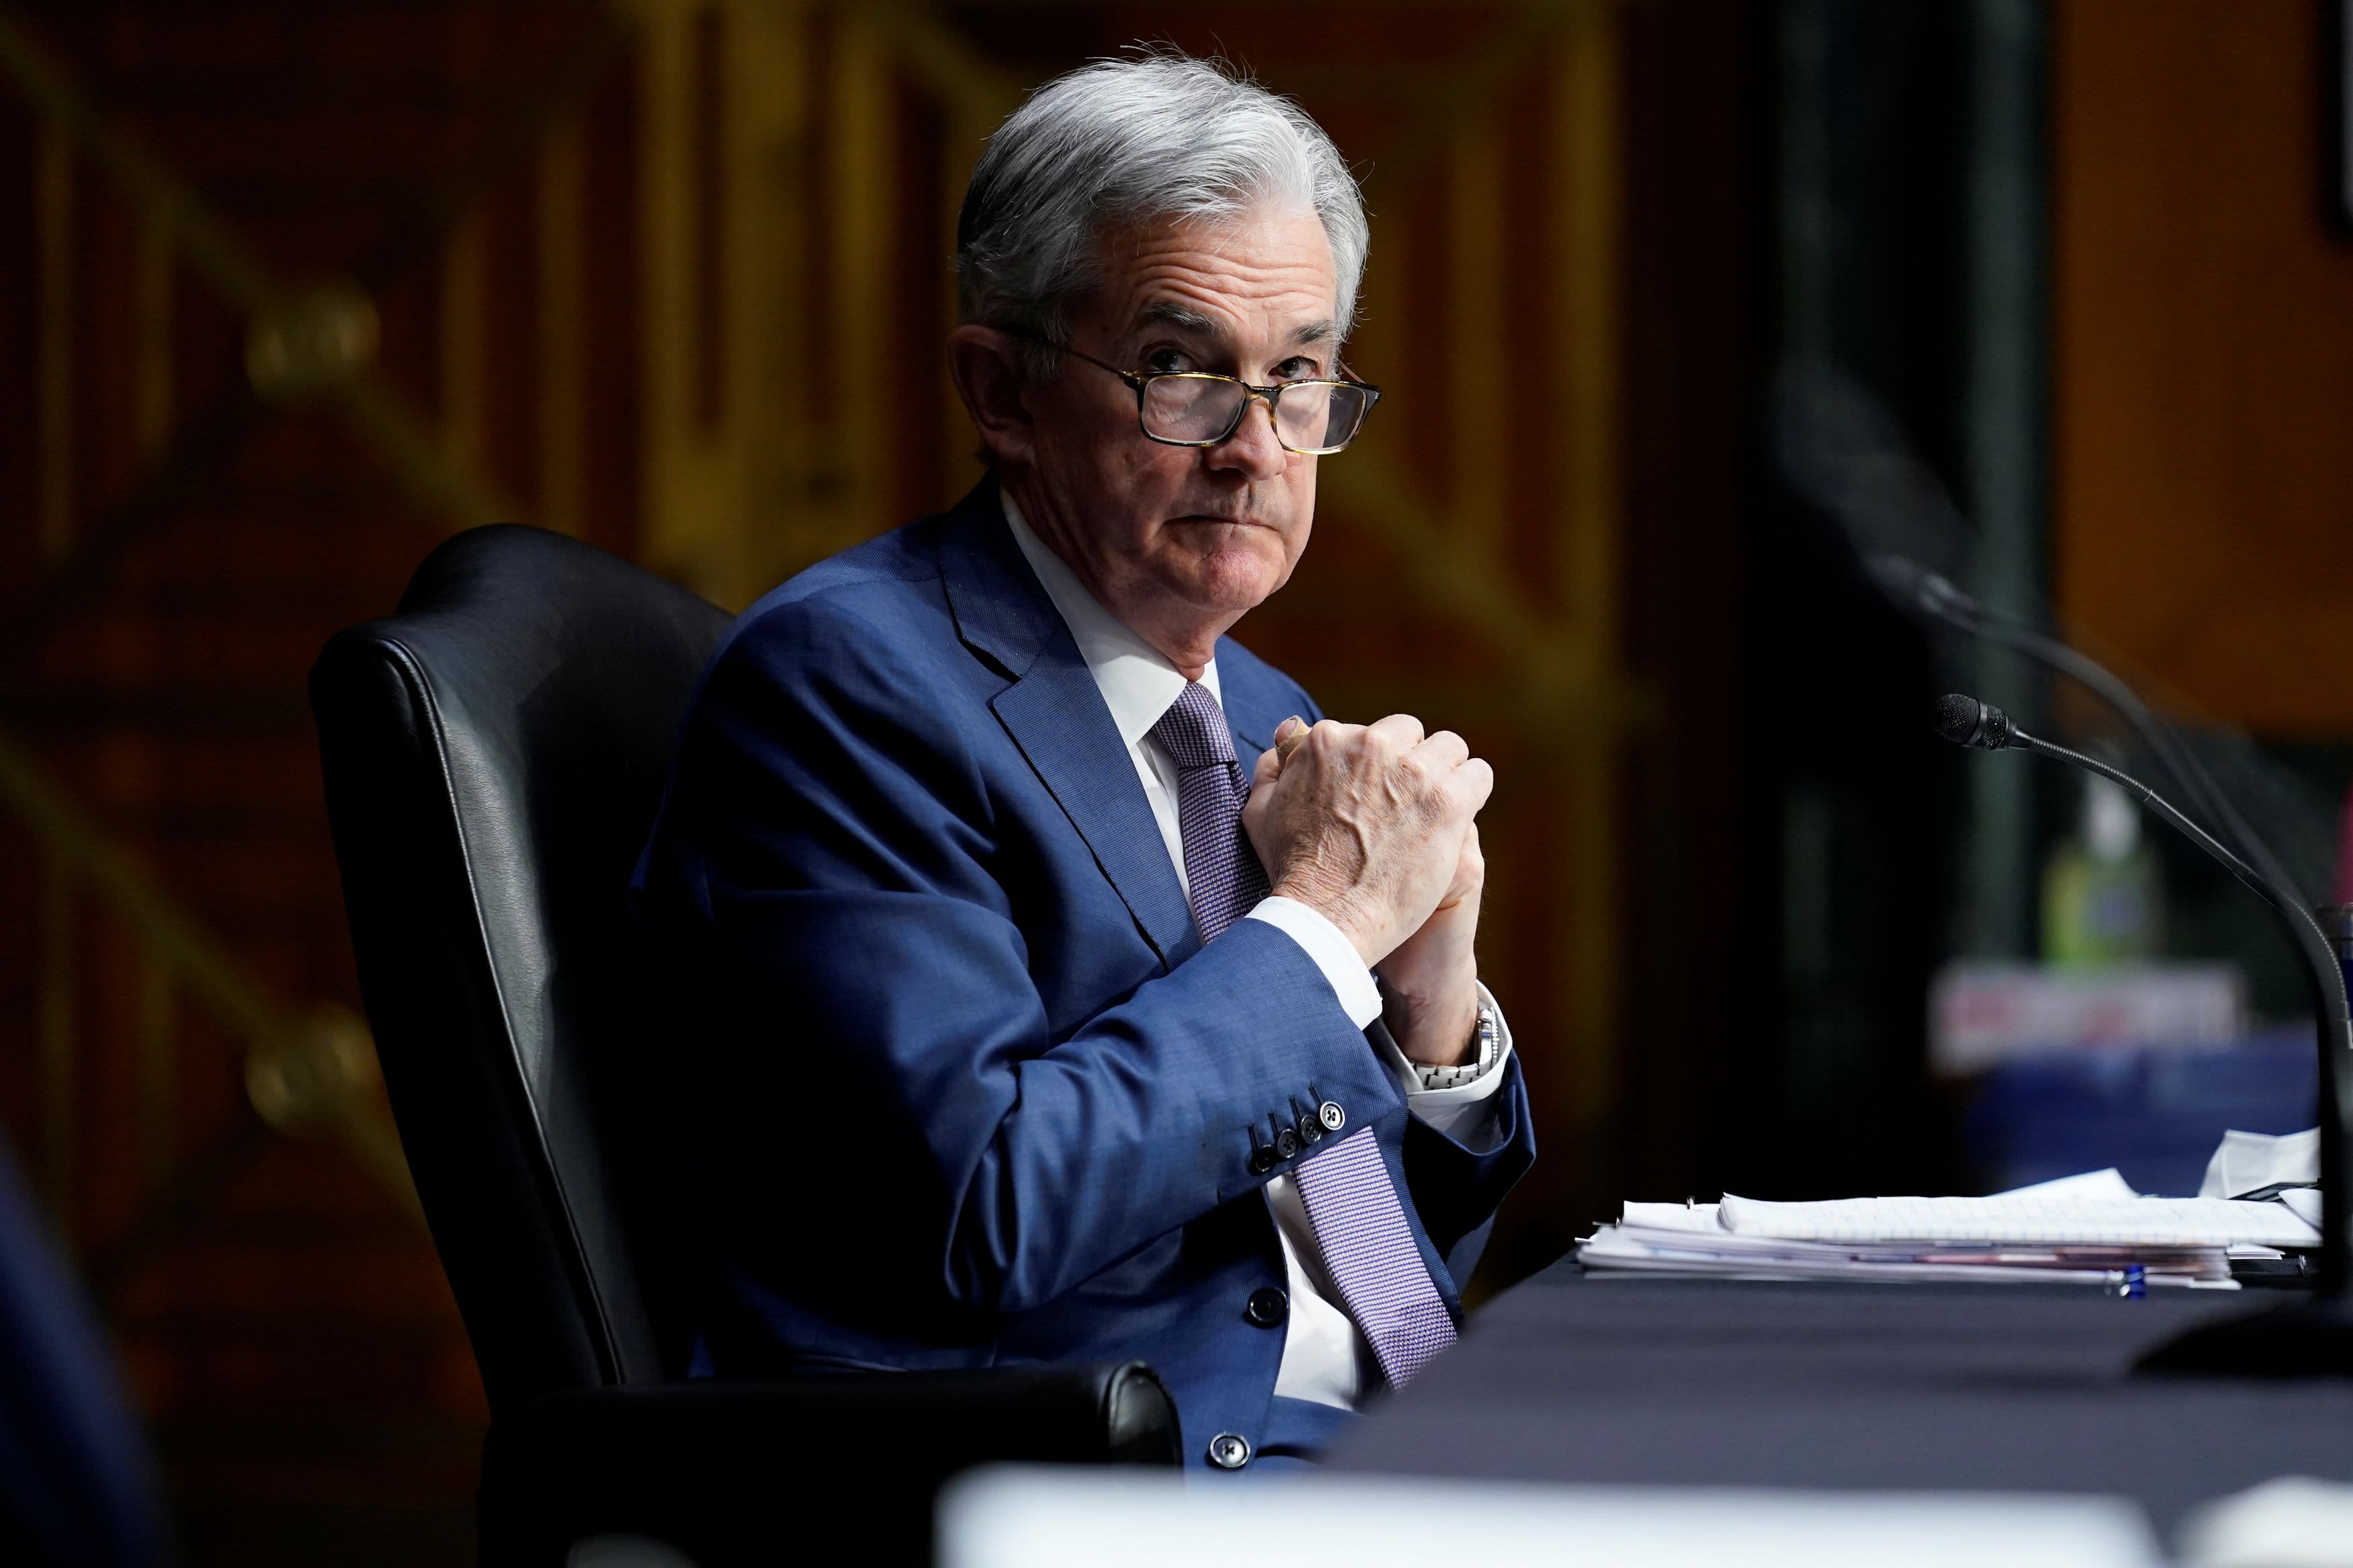 The Fed could be a source of market volatility as Powell and others speak in the week ahead